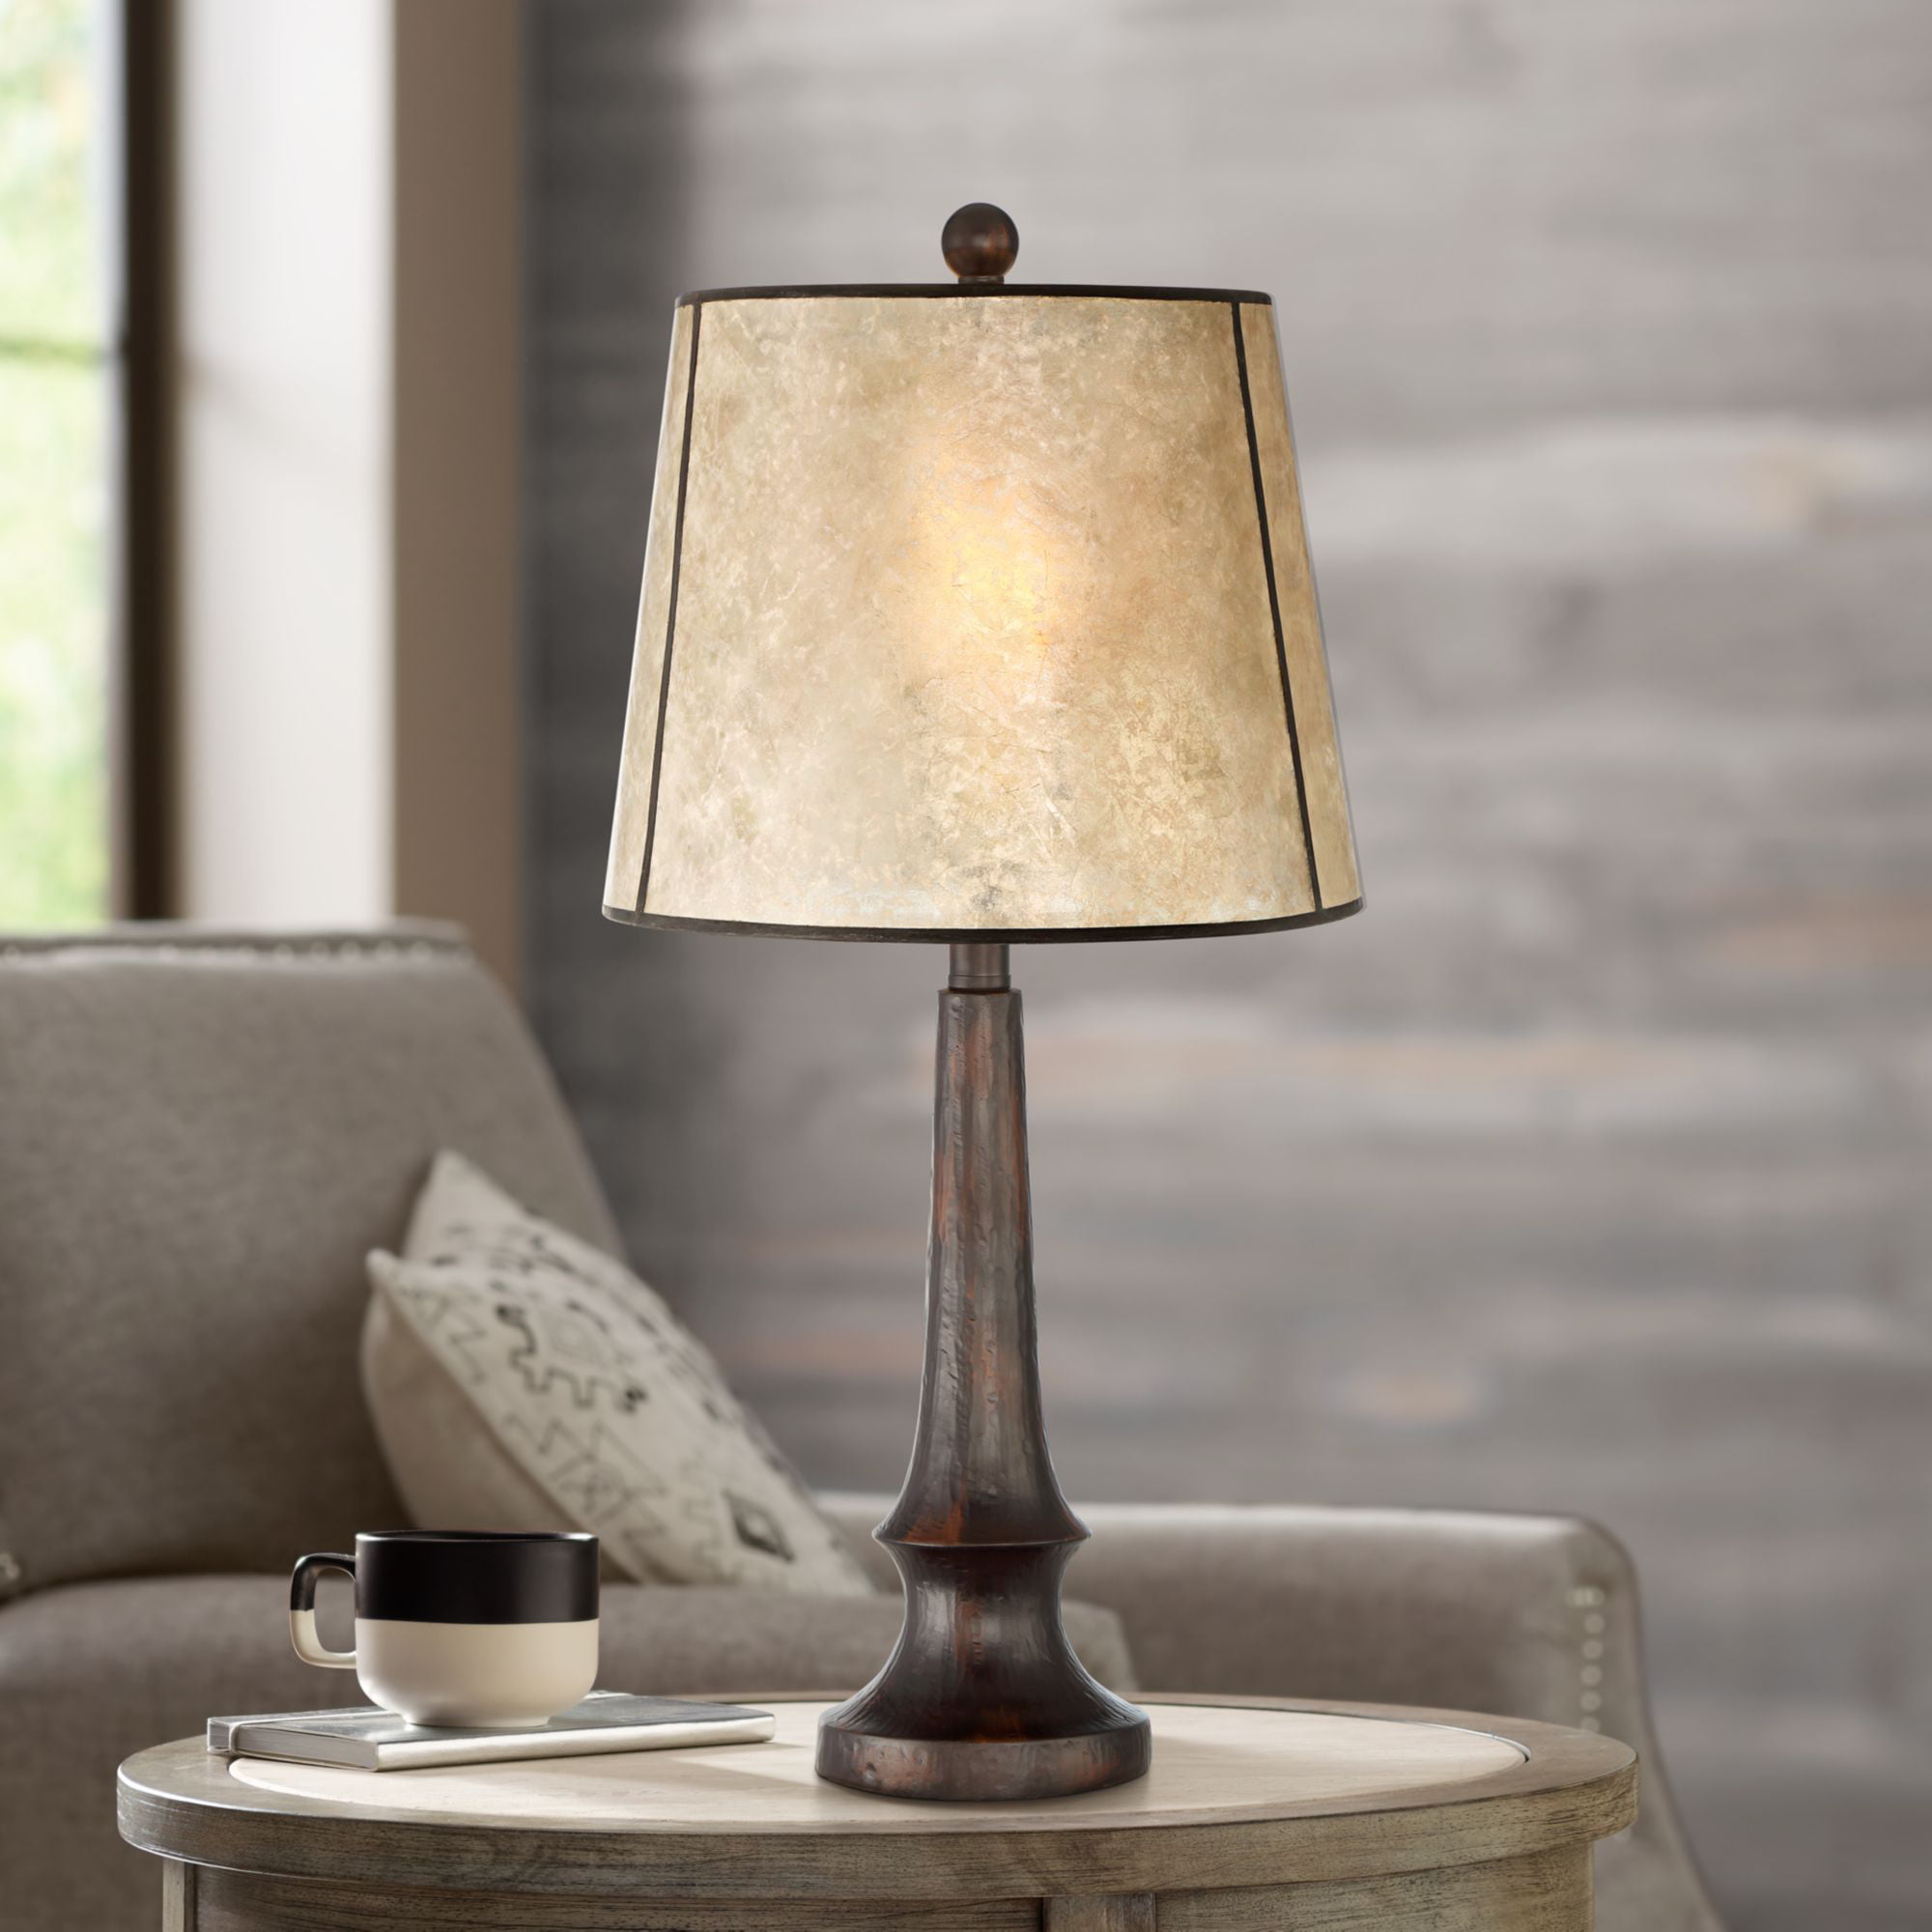 Franklin Iron Works Rustic Table Lamp Aged Bronze Mica Drum Shade